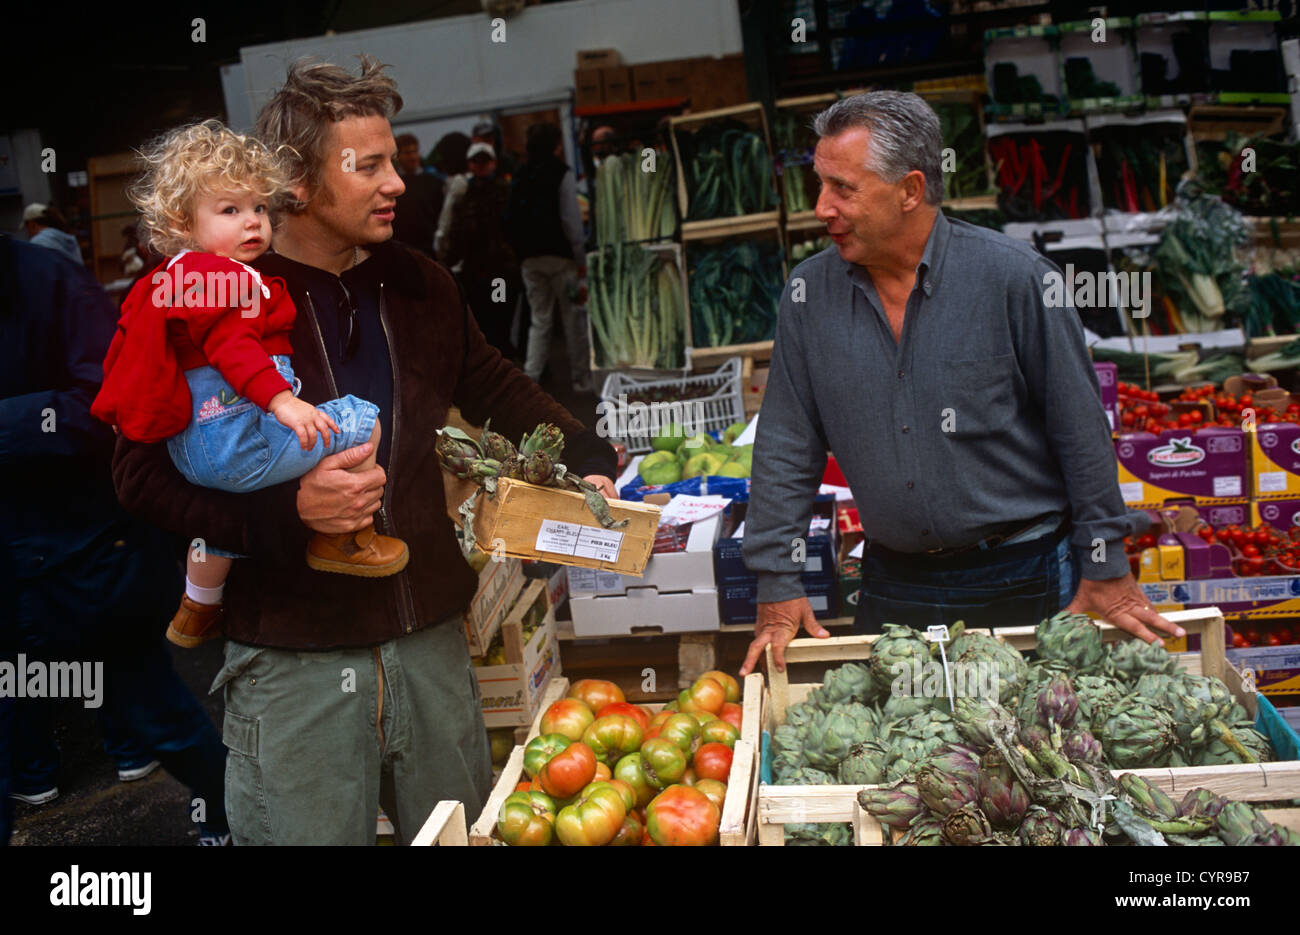 TV chef Jamie Oliver shops for produce with a favoured veg seller in Borough Market in Southwark, London. Stock Photo